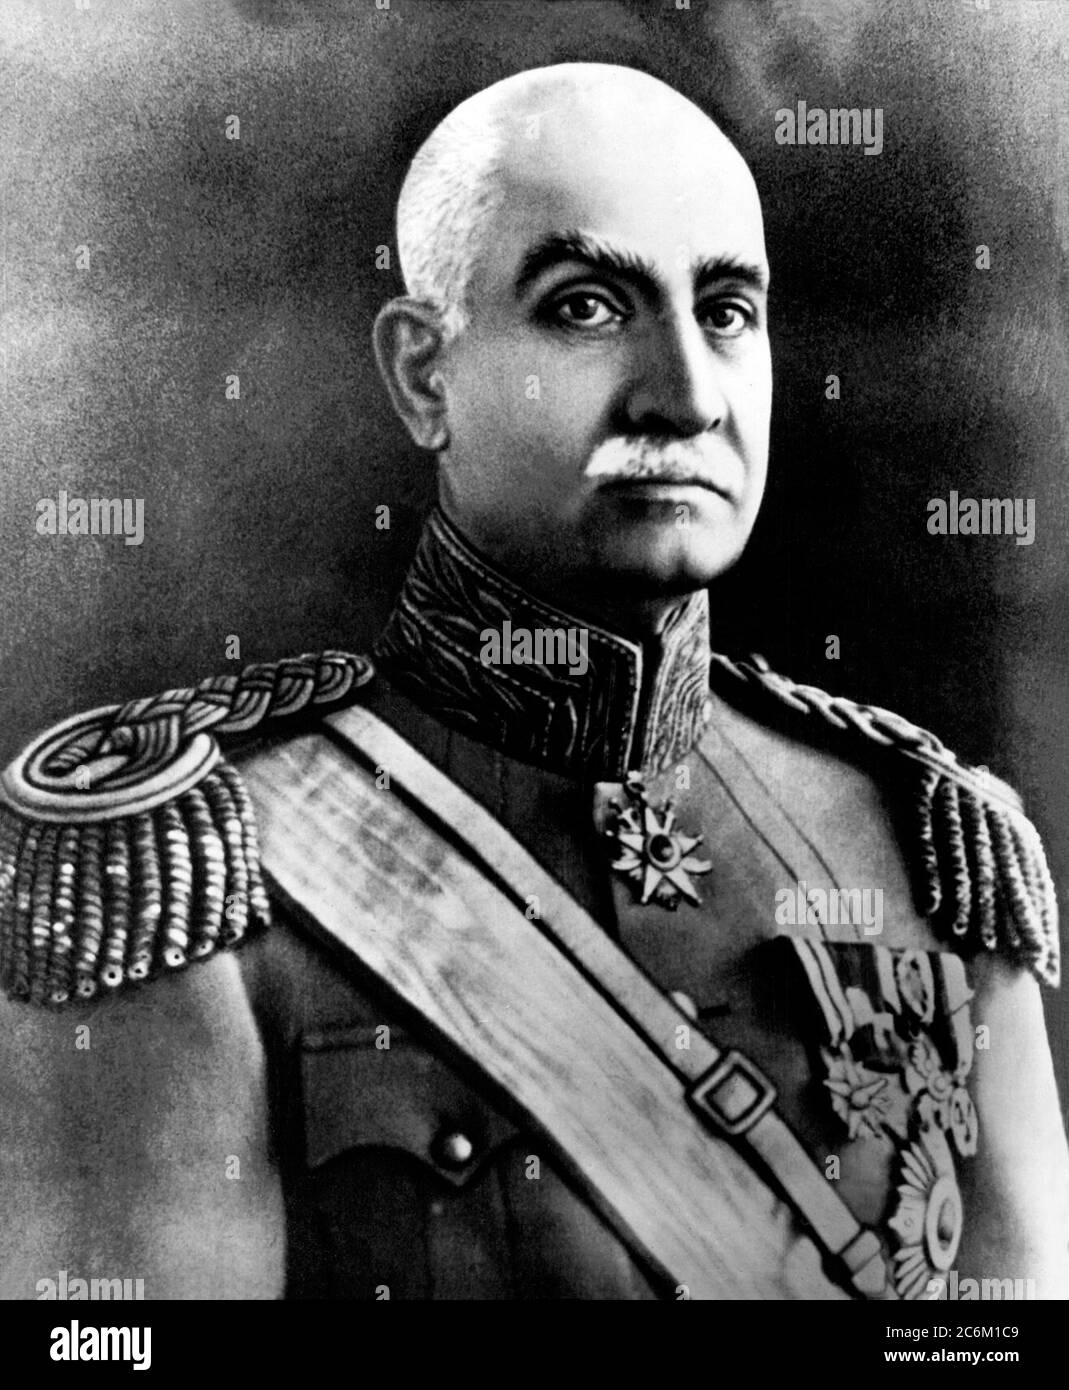 1940 c, PERSIA : The persian Emperor REZA Shah PAHLAVI ( 1878 - 1944 ). Was the Shah of Iran from 15 December 1925 until he was forced to abdicate by the Anglo-Soviet invasion of Iran on 16 September 1941. Father of Mohammad Reza Pahlavi Shah ( 1919 - 1980 ). - IRAN - IMPERATORE della PERSIA  - NOBILITY - NOBILI - Nobiltà -  FOTO STORICHE - HISTORY - military uniform - uniforme divisa militare  ---  Archivio GBB Stock Photo